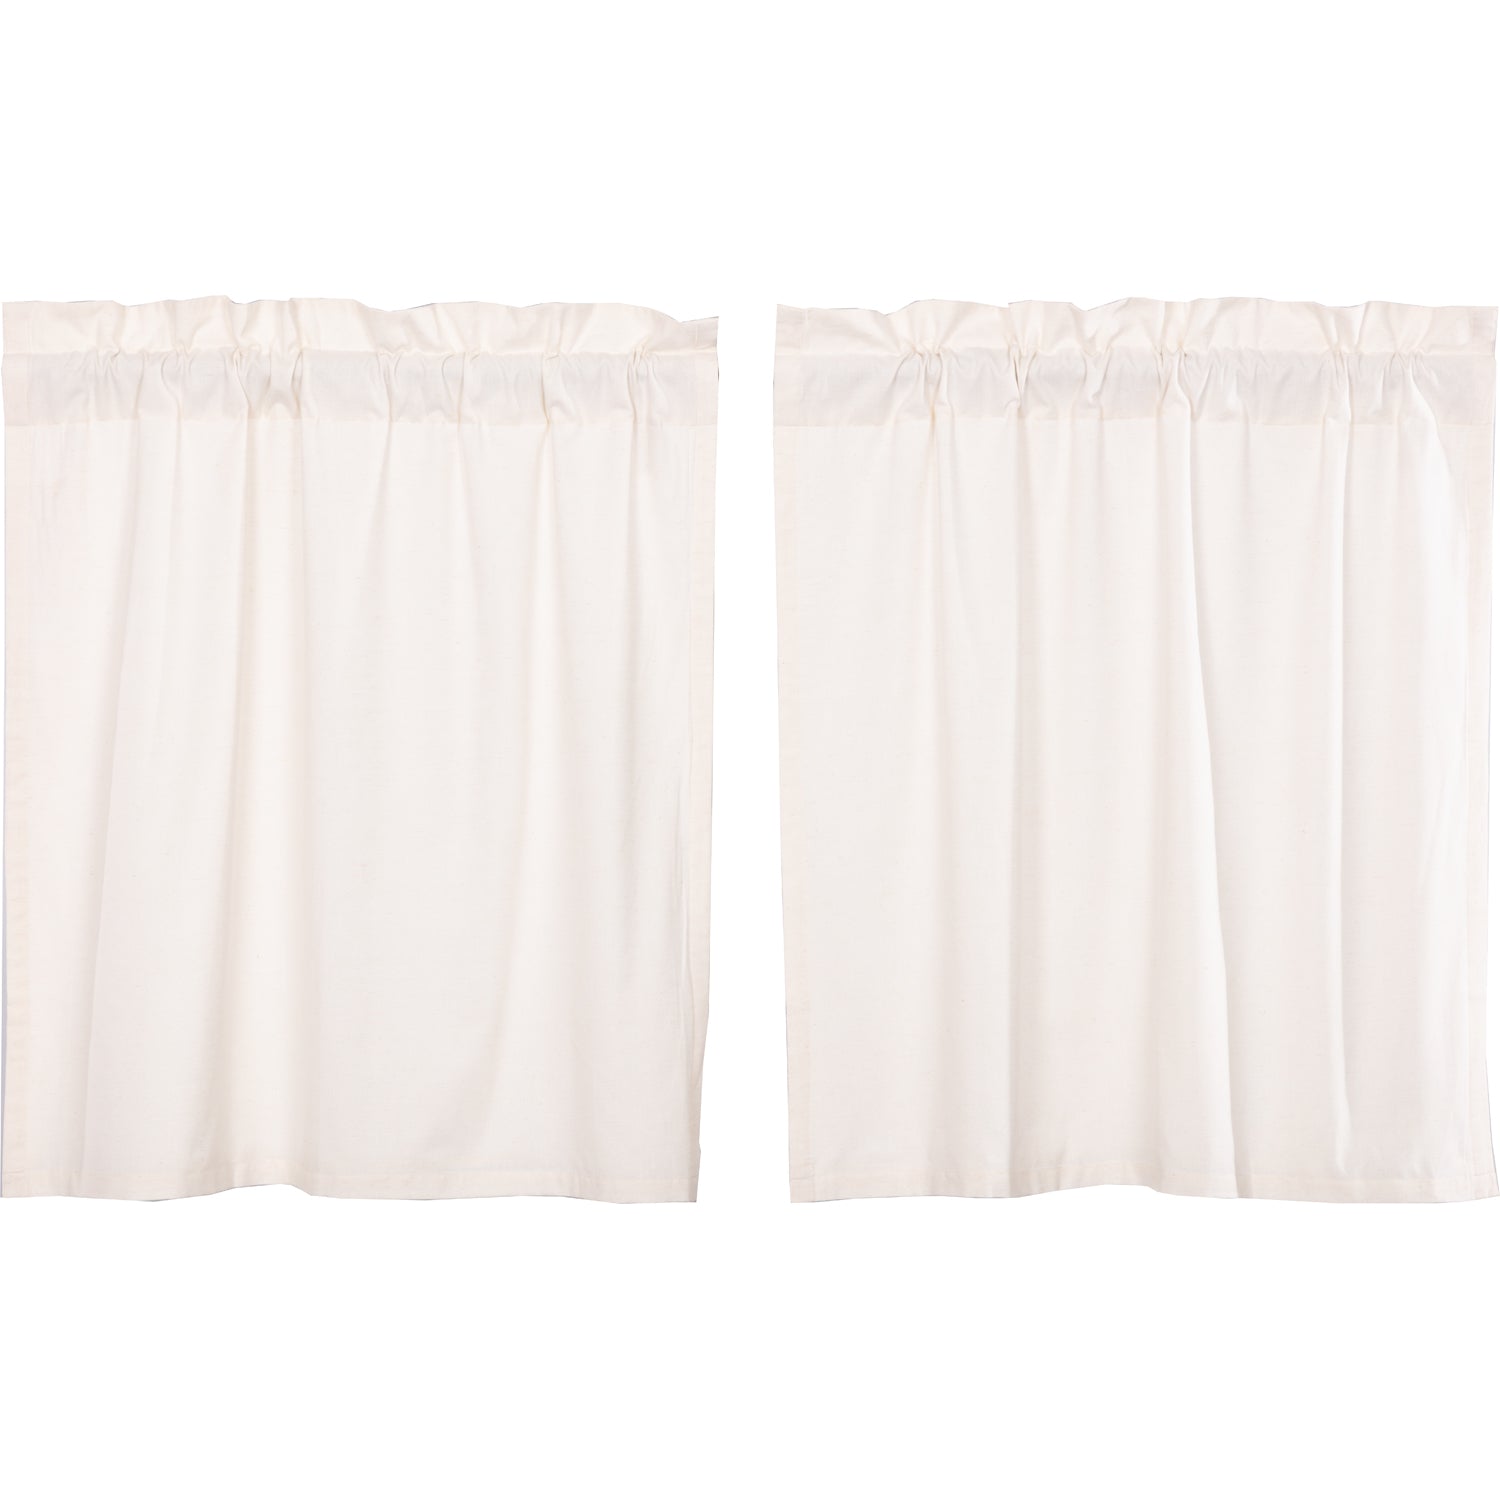 Simple Life Flax Antique White Tier Set of 2 L36xW36